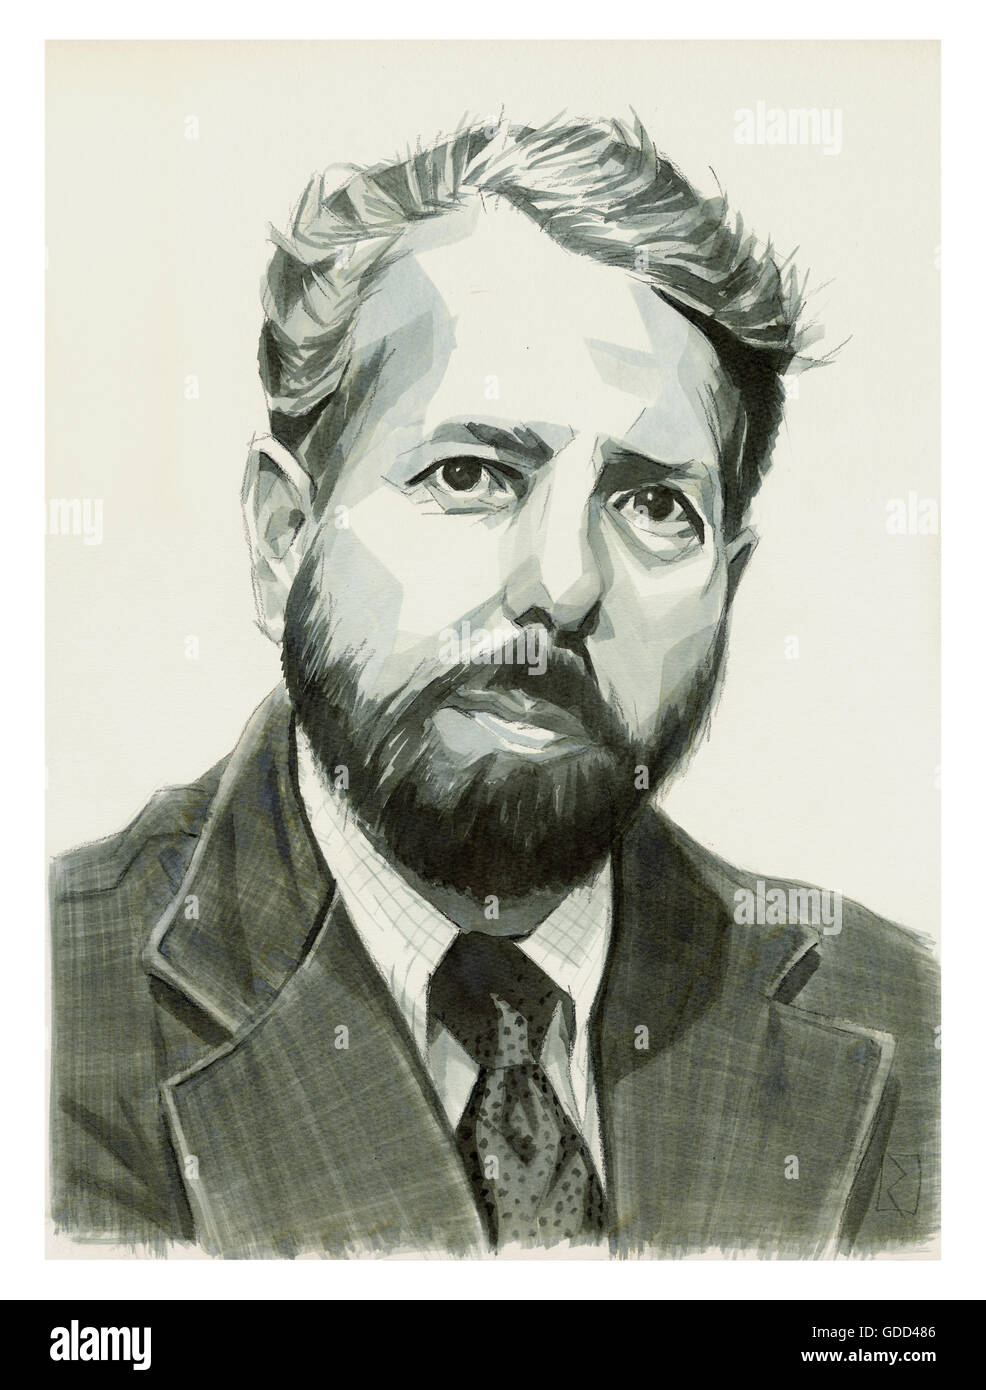 Milgram, Stanley, 15.8.1933 - 20.12.1984, American scientist (psychologist), portrait, monochrome drawing by Jan Rieckhoff, 4.8.2007, Artist's Copyright already cleared through INTERFOTO, no additional clearance necessary Stock Photo